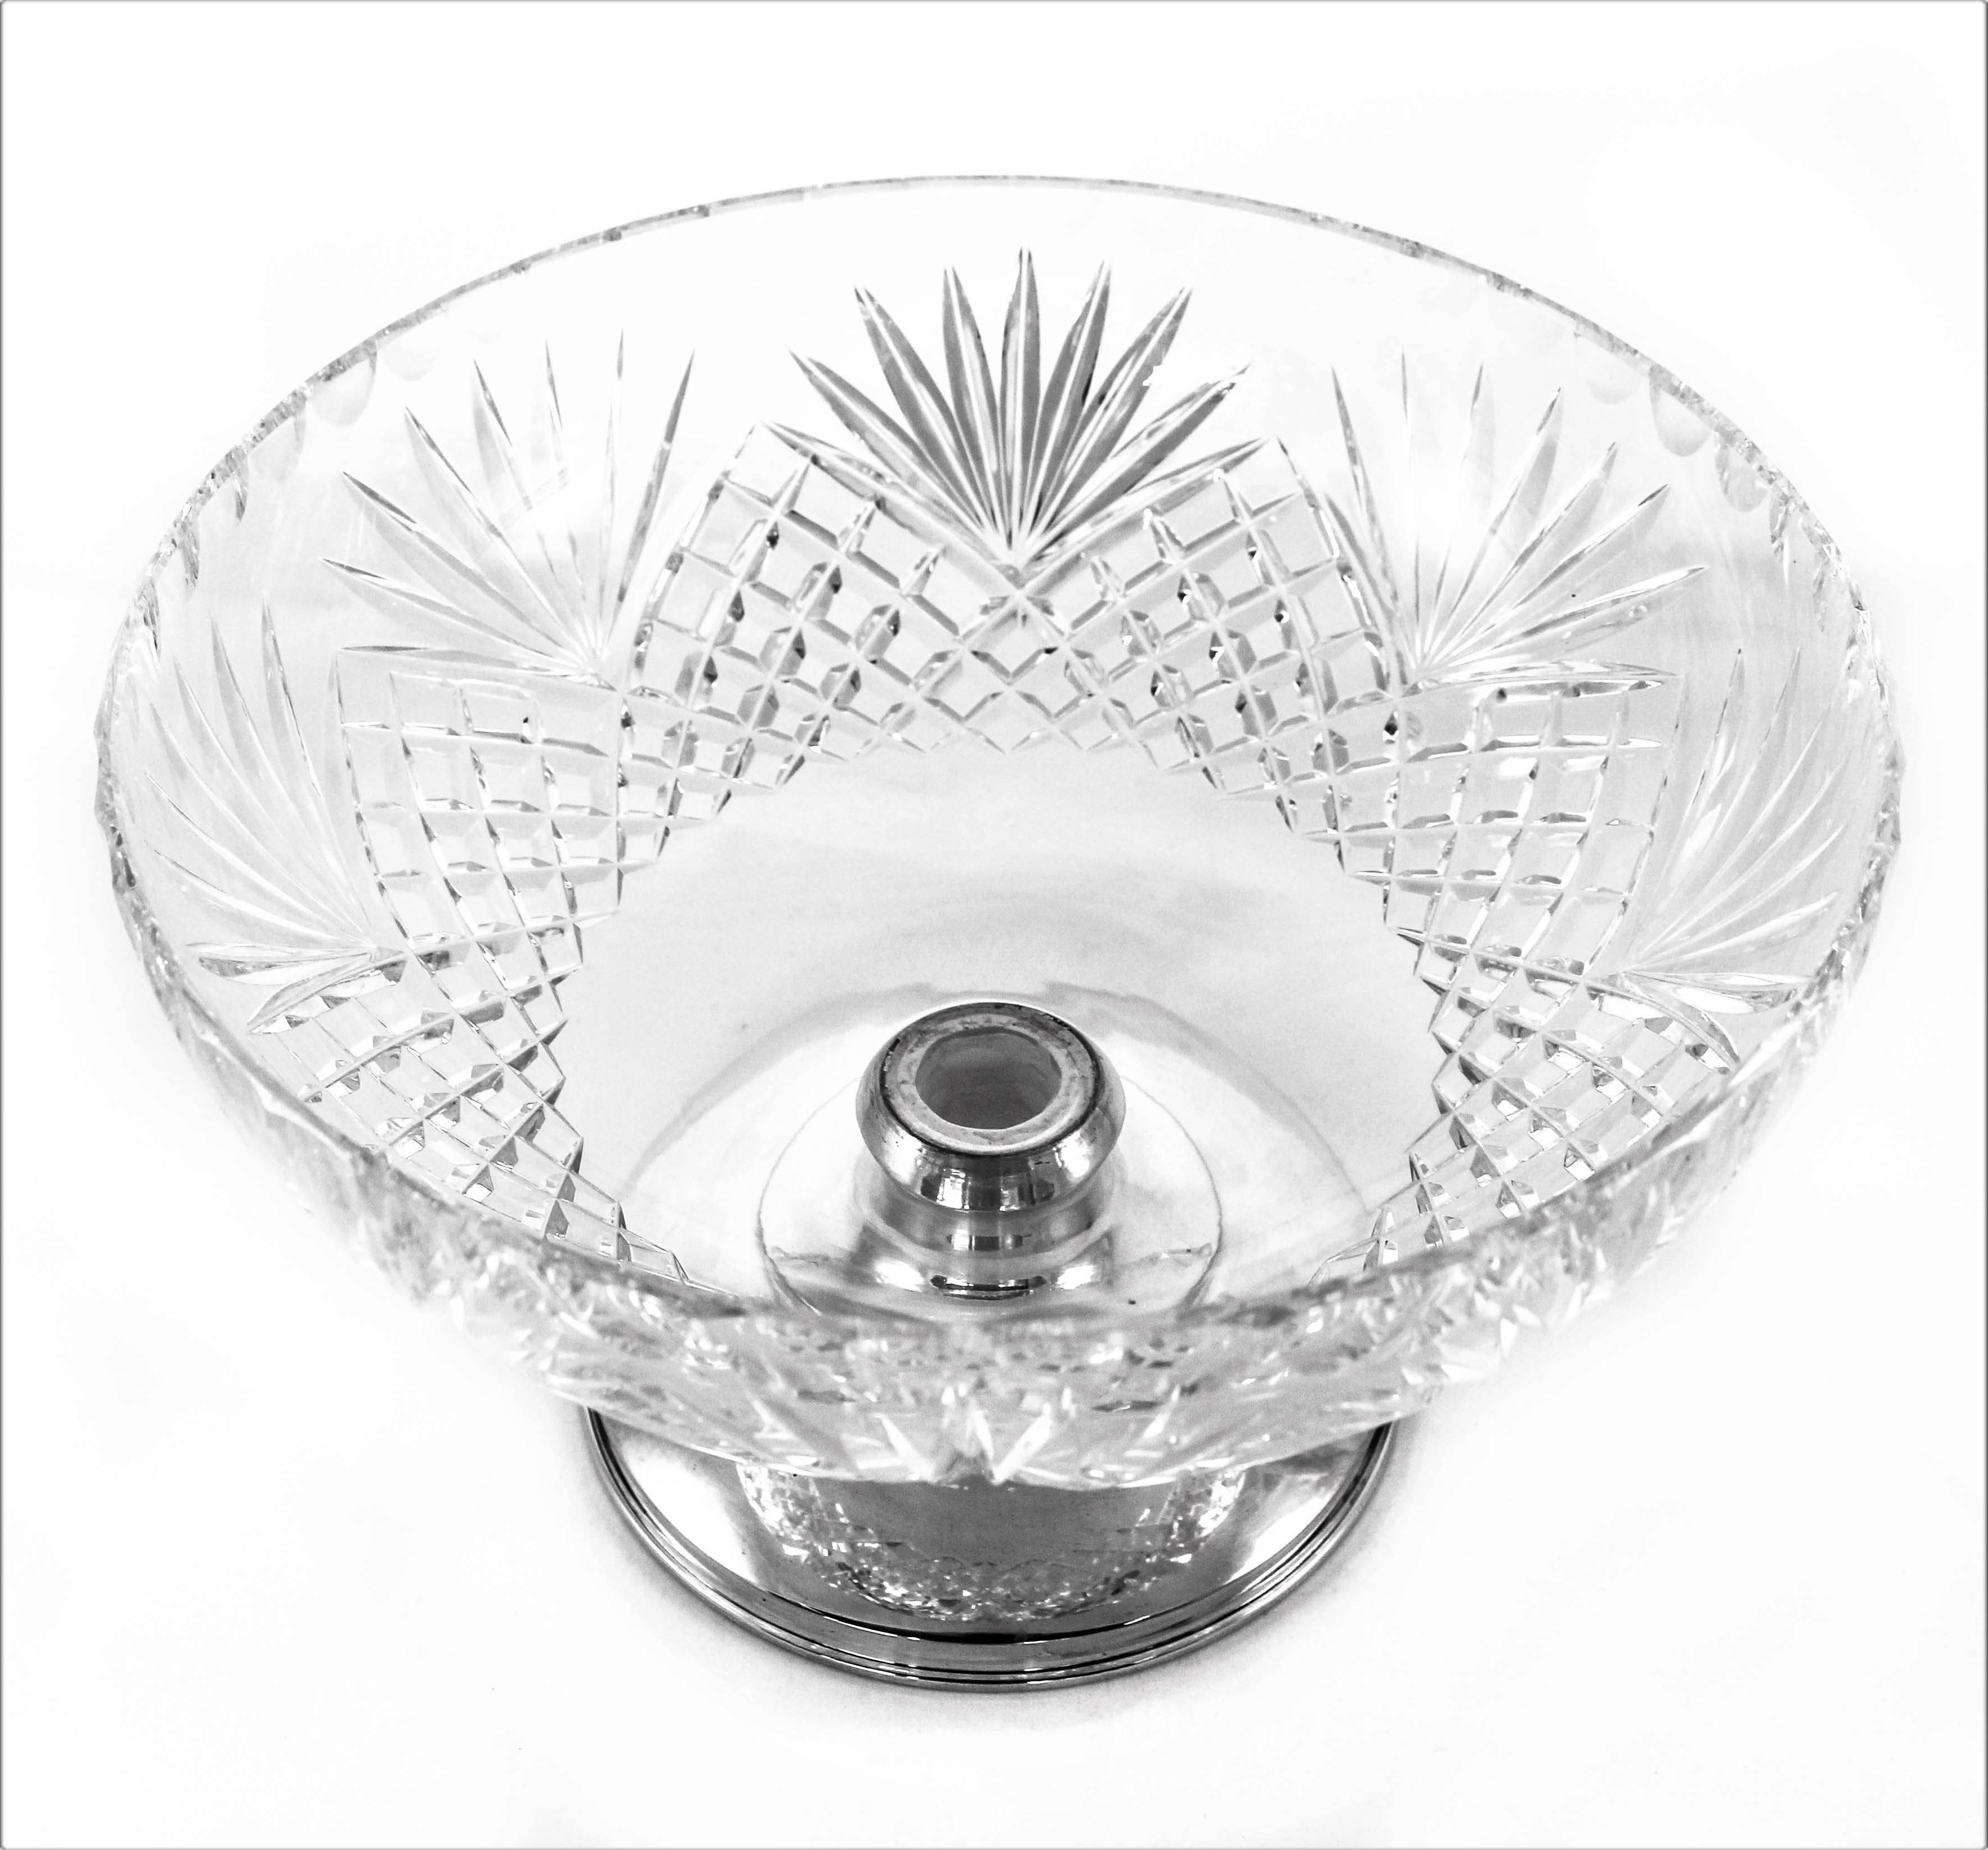 Famous for their cut-glass designs, Hawkes was the premiere glass blower in the late 19th and early 20th century. Of note was there mix of crystal and sterling silver. This particular piece is done in the Pineapple pattern. A series of eight